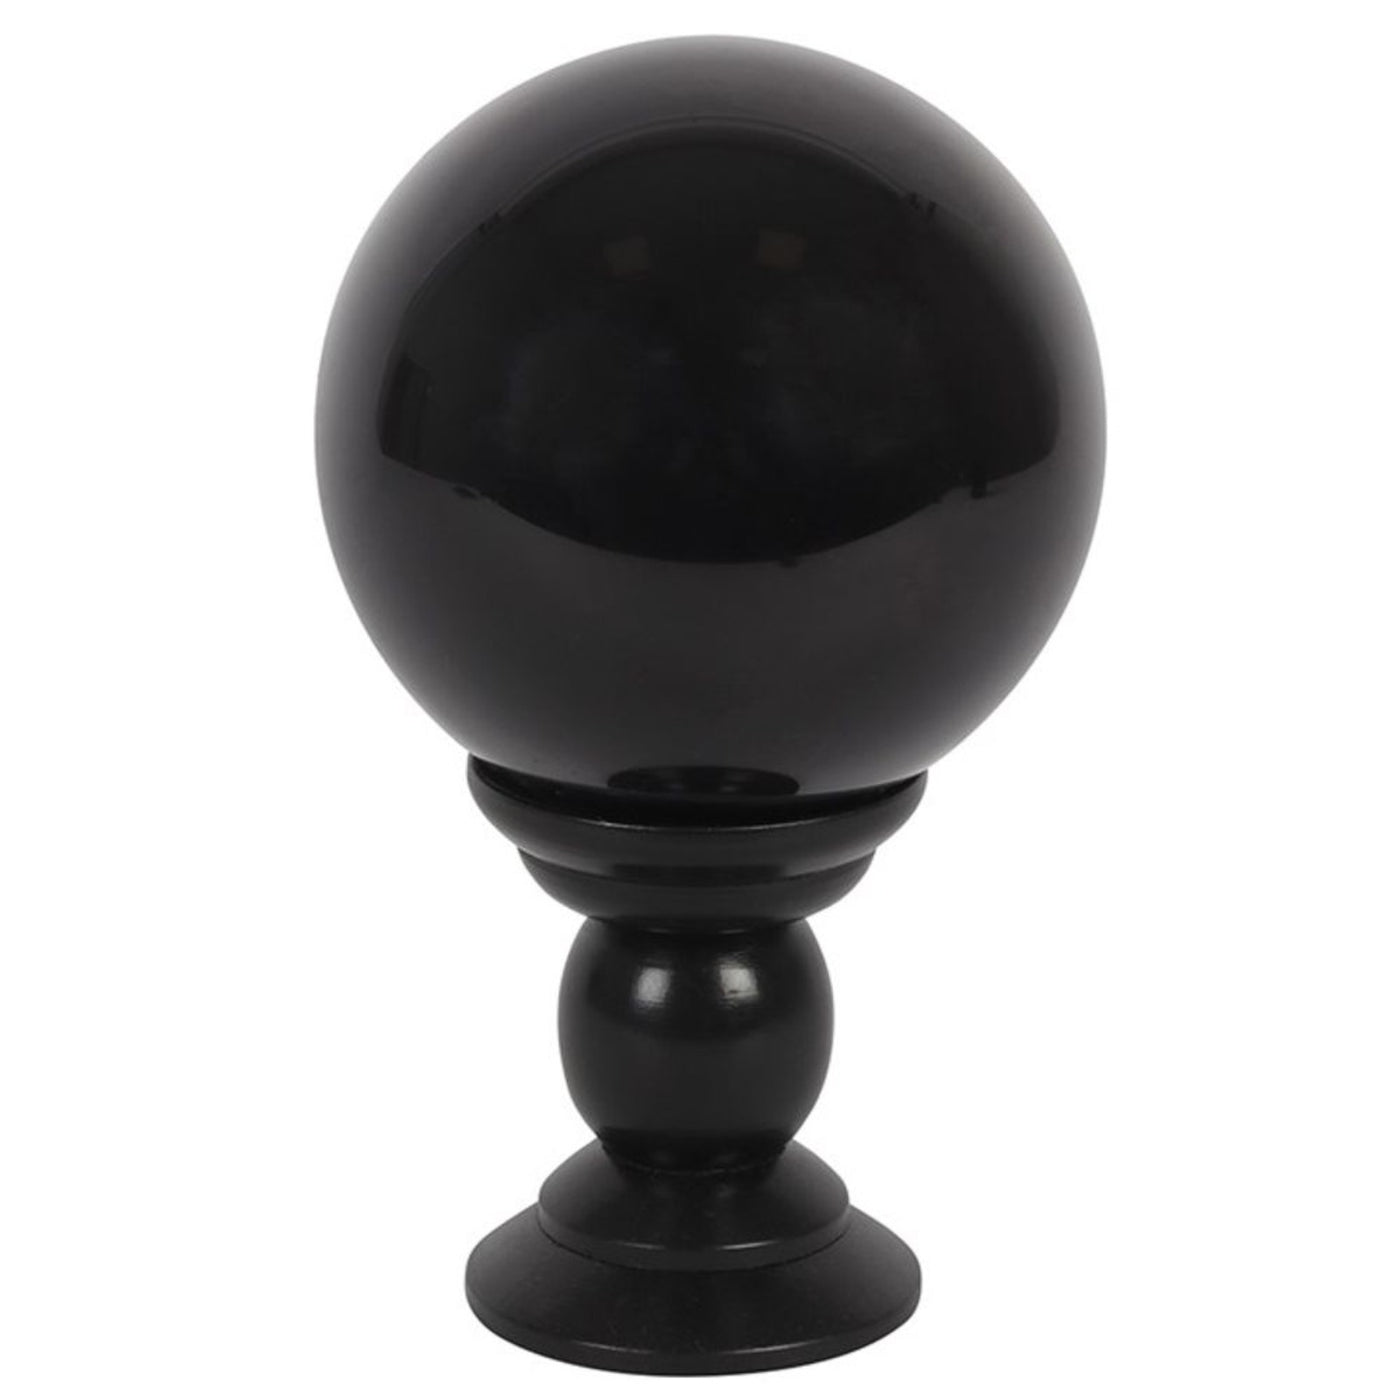 Large Black Crystal Ball Ornament On Wooden Stand.